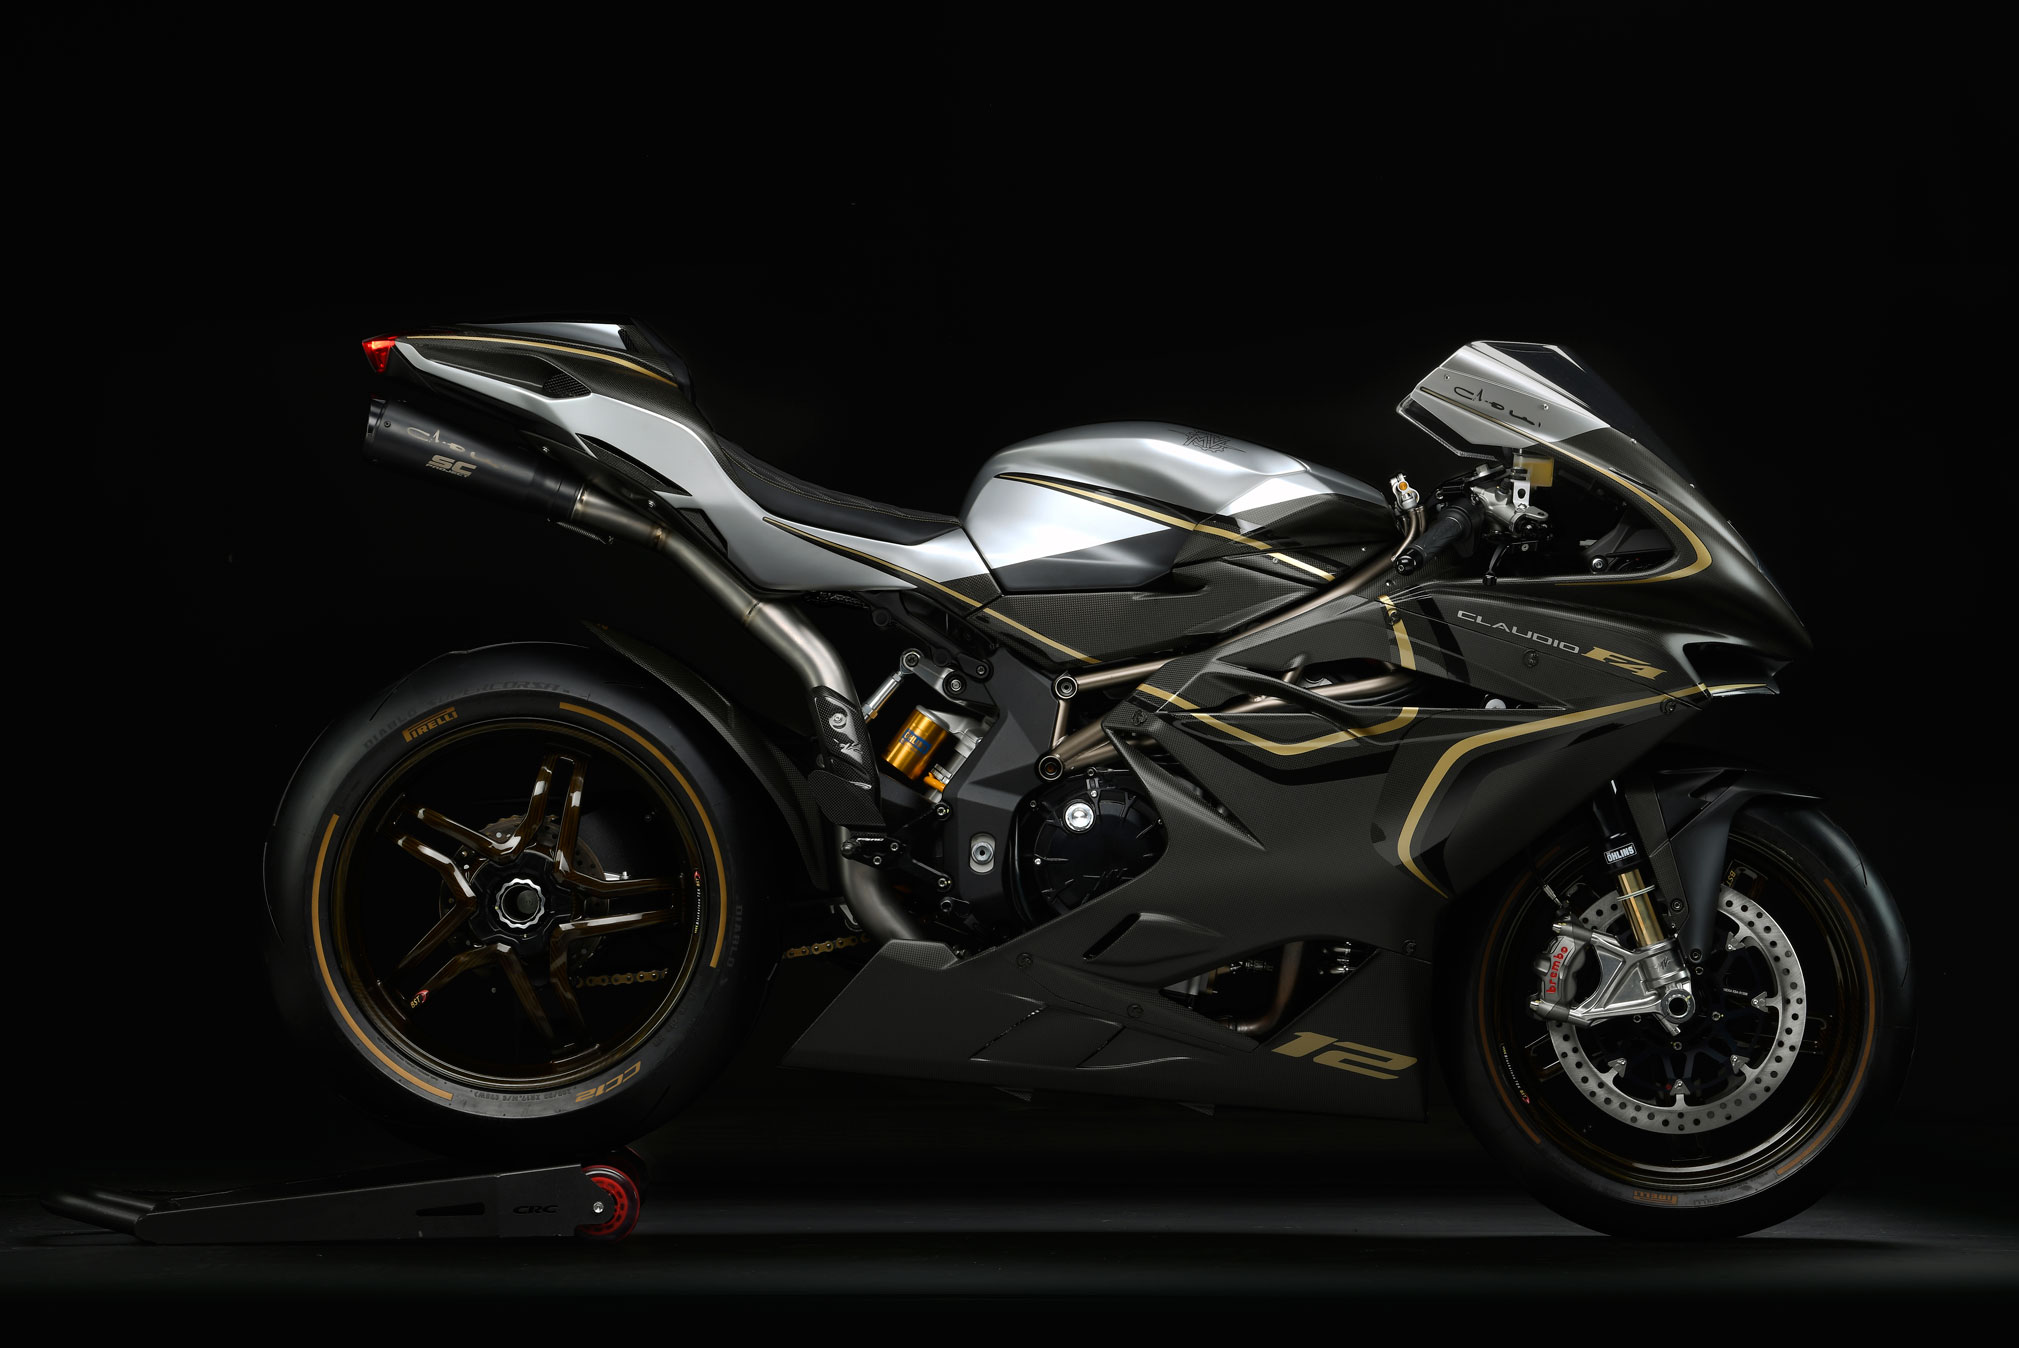 2019 MV Augusta F4 RR Motorcycle UAEs Prices, Specs 